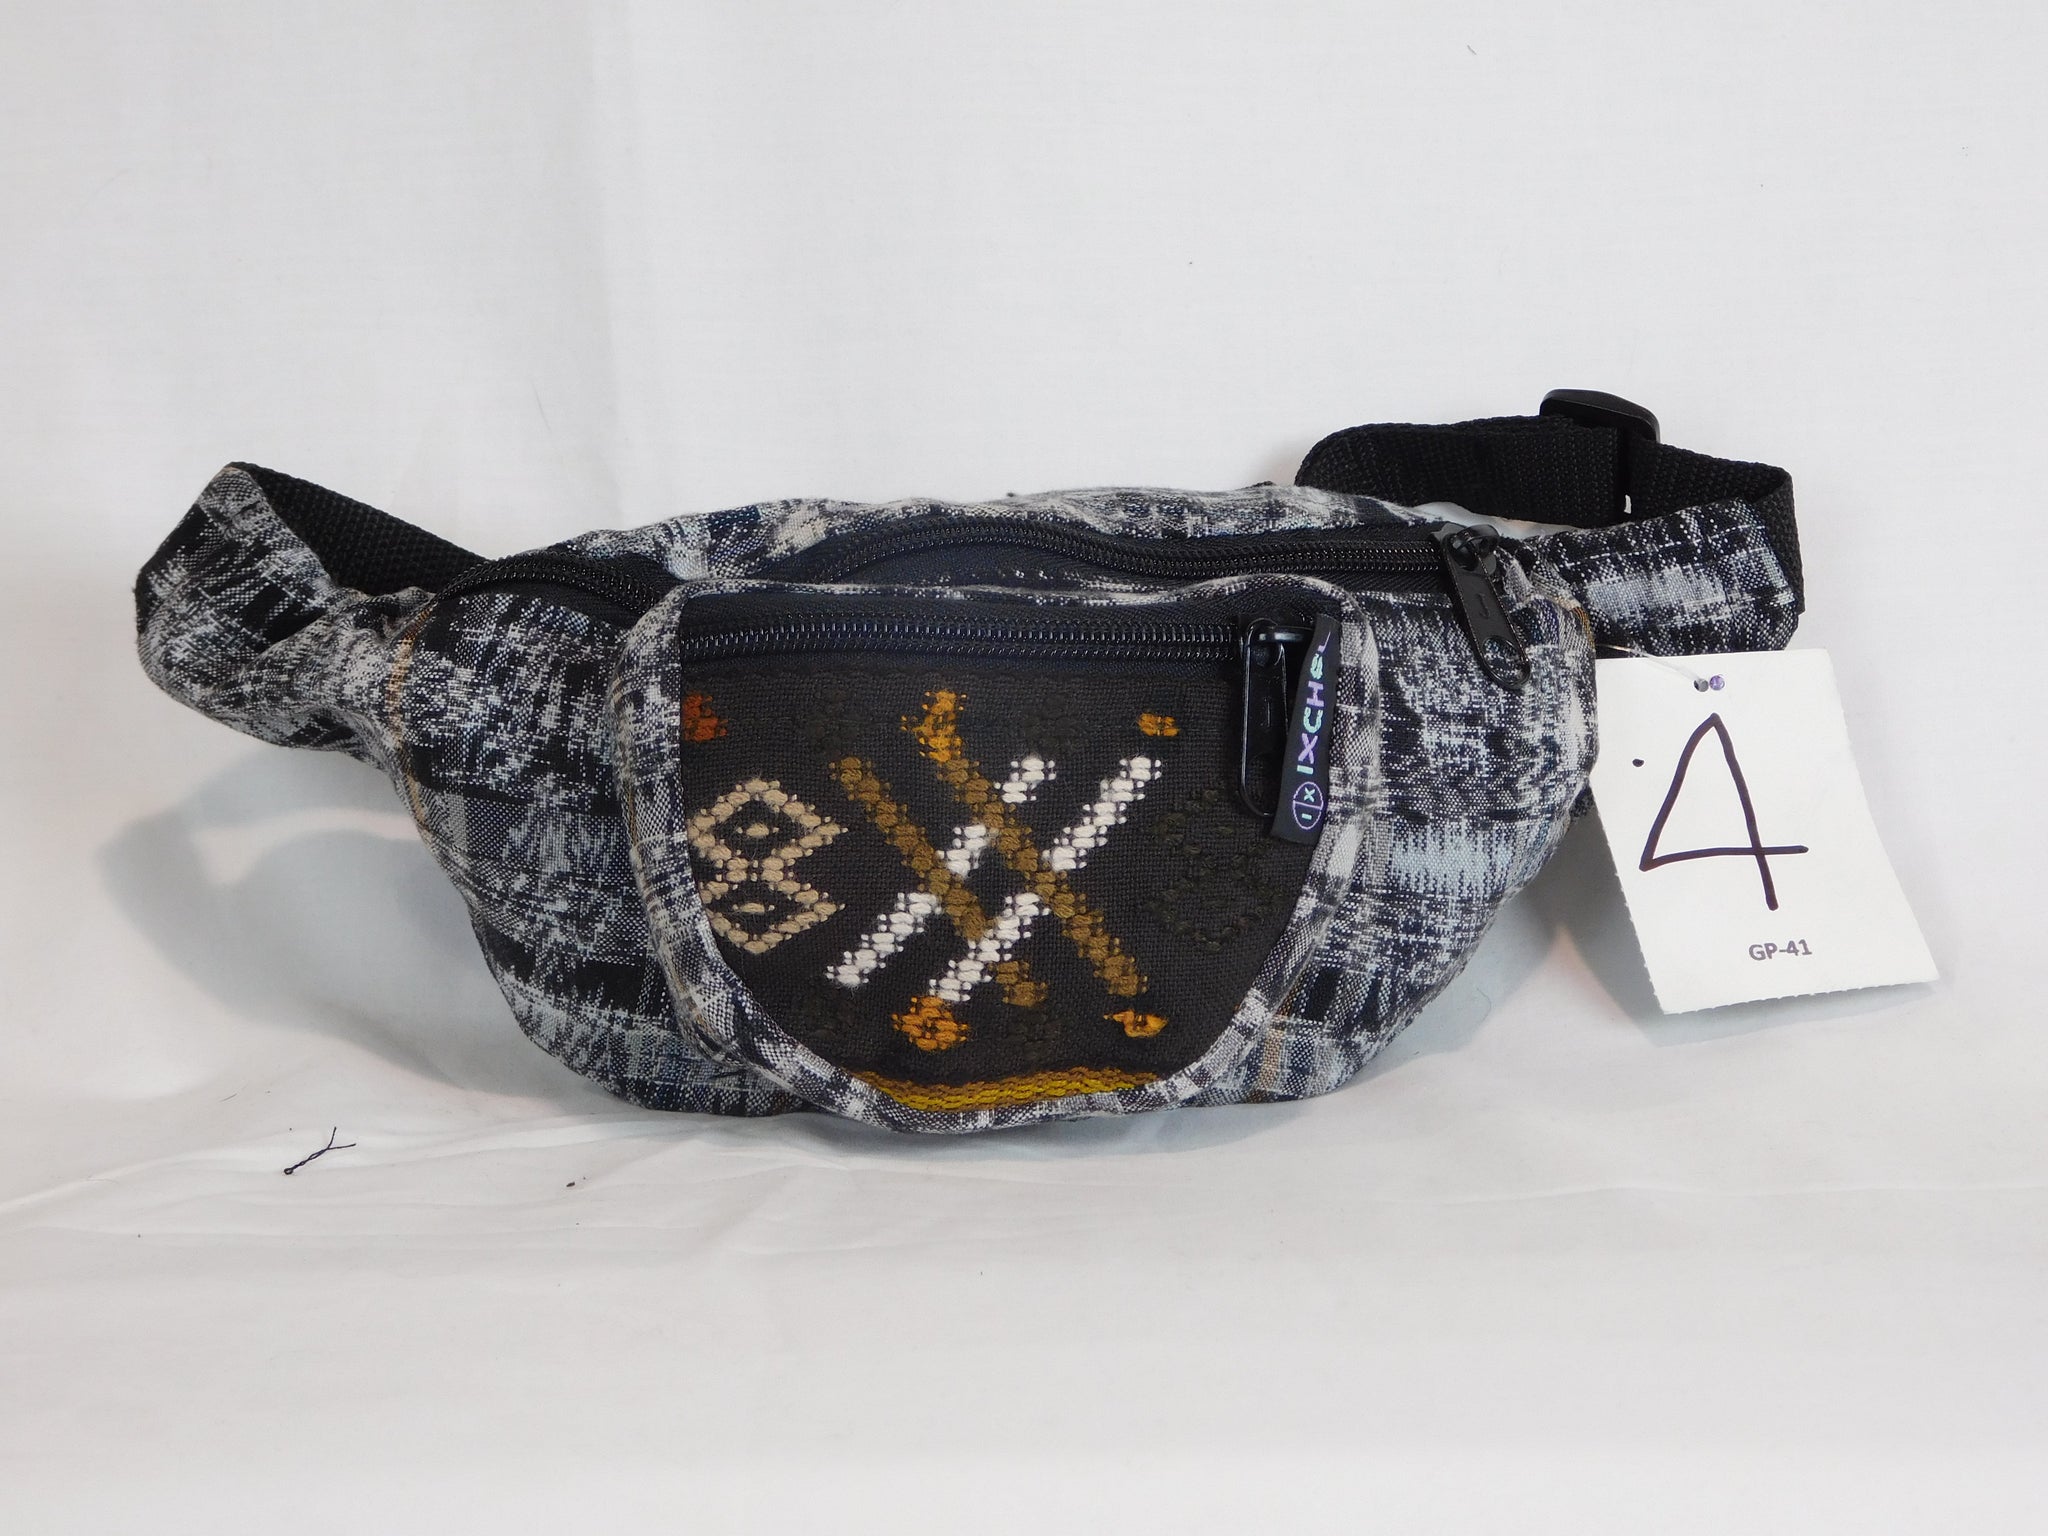 Hand woven waist pack with three pockets & brocade accents